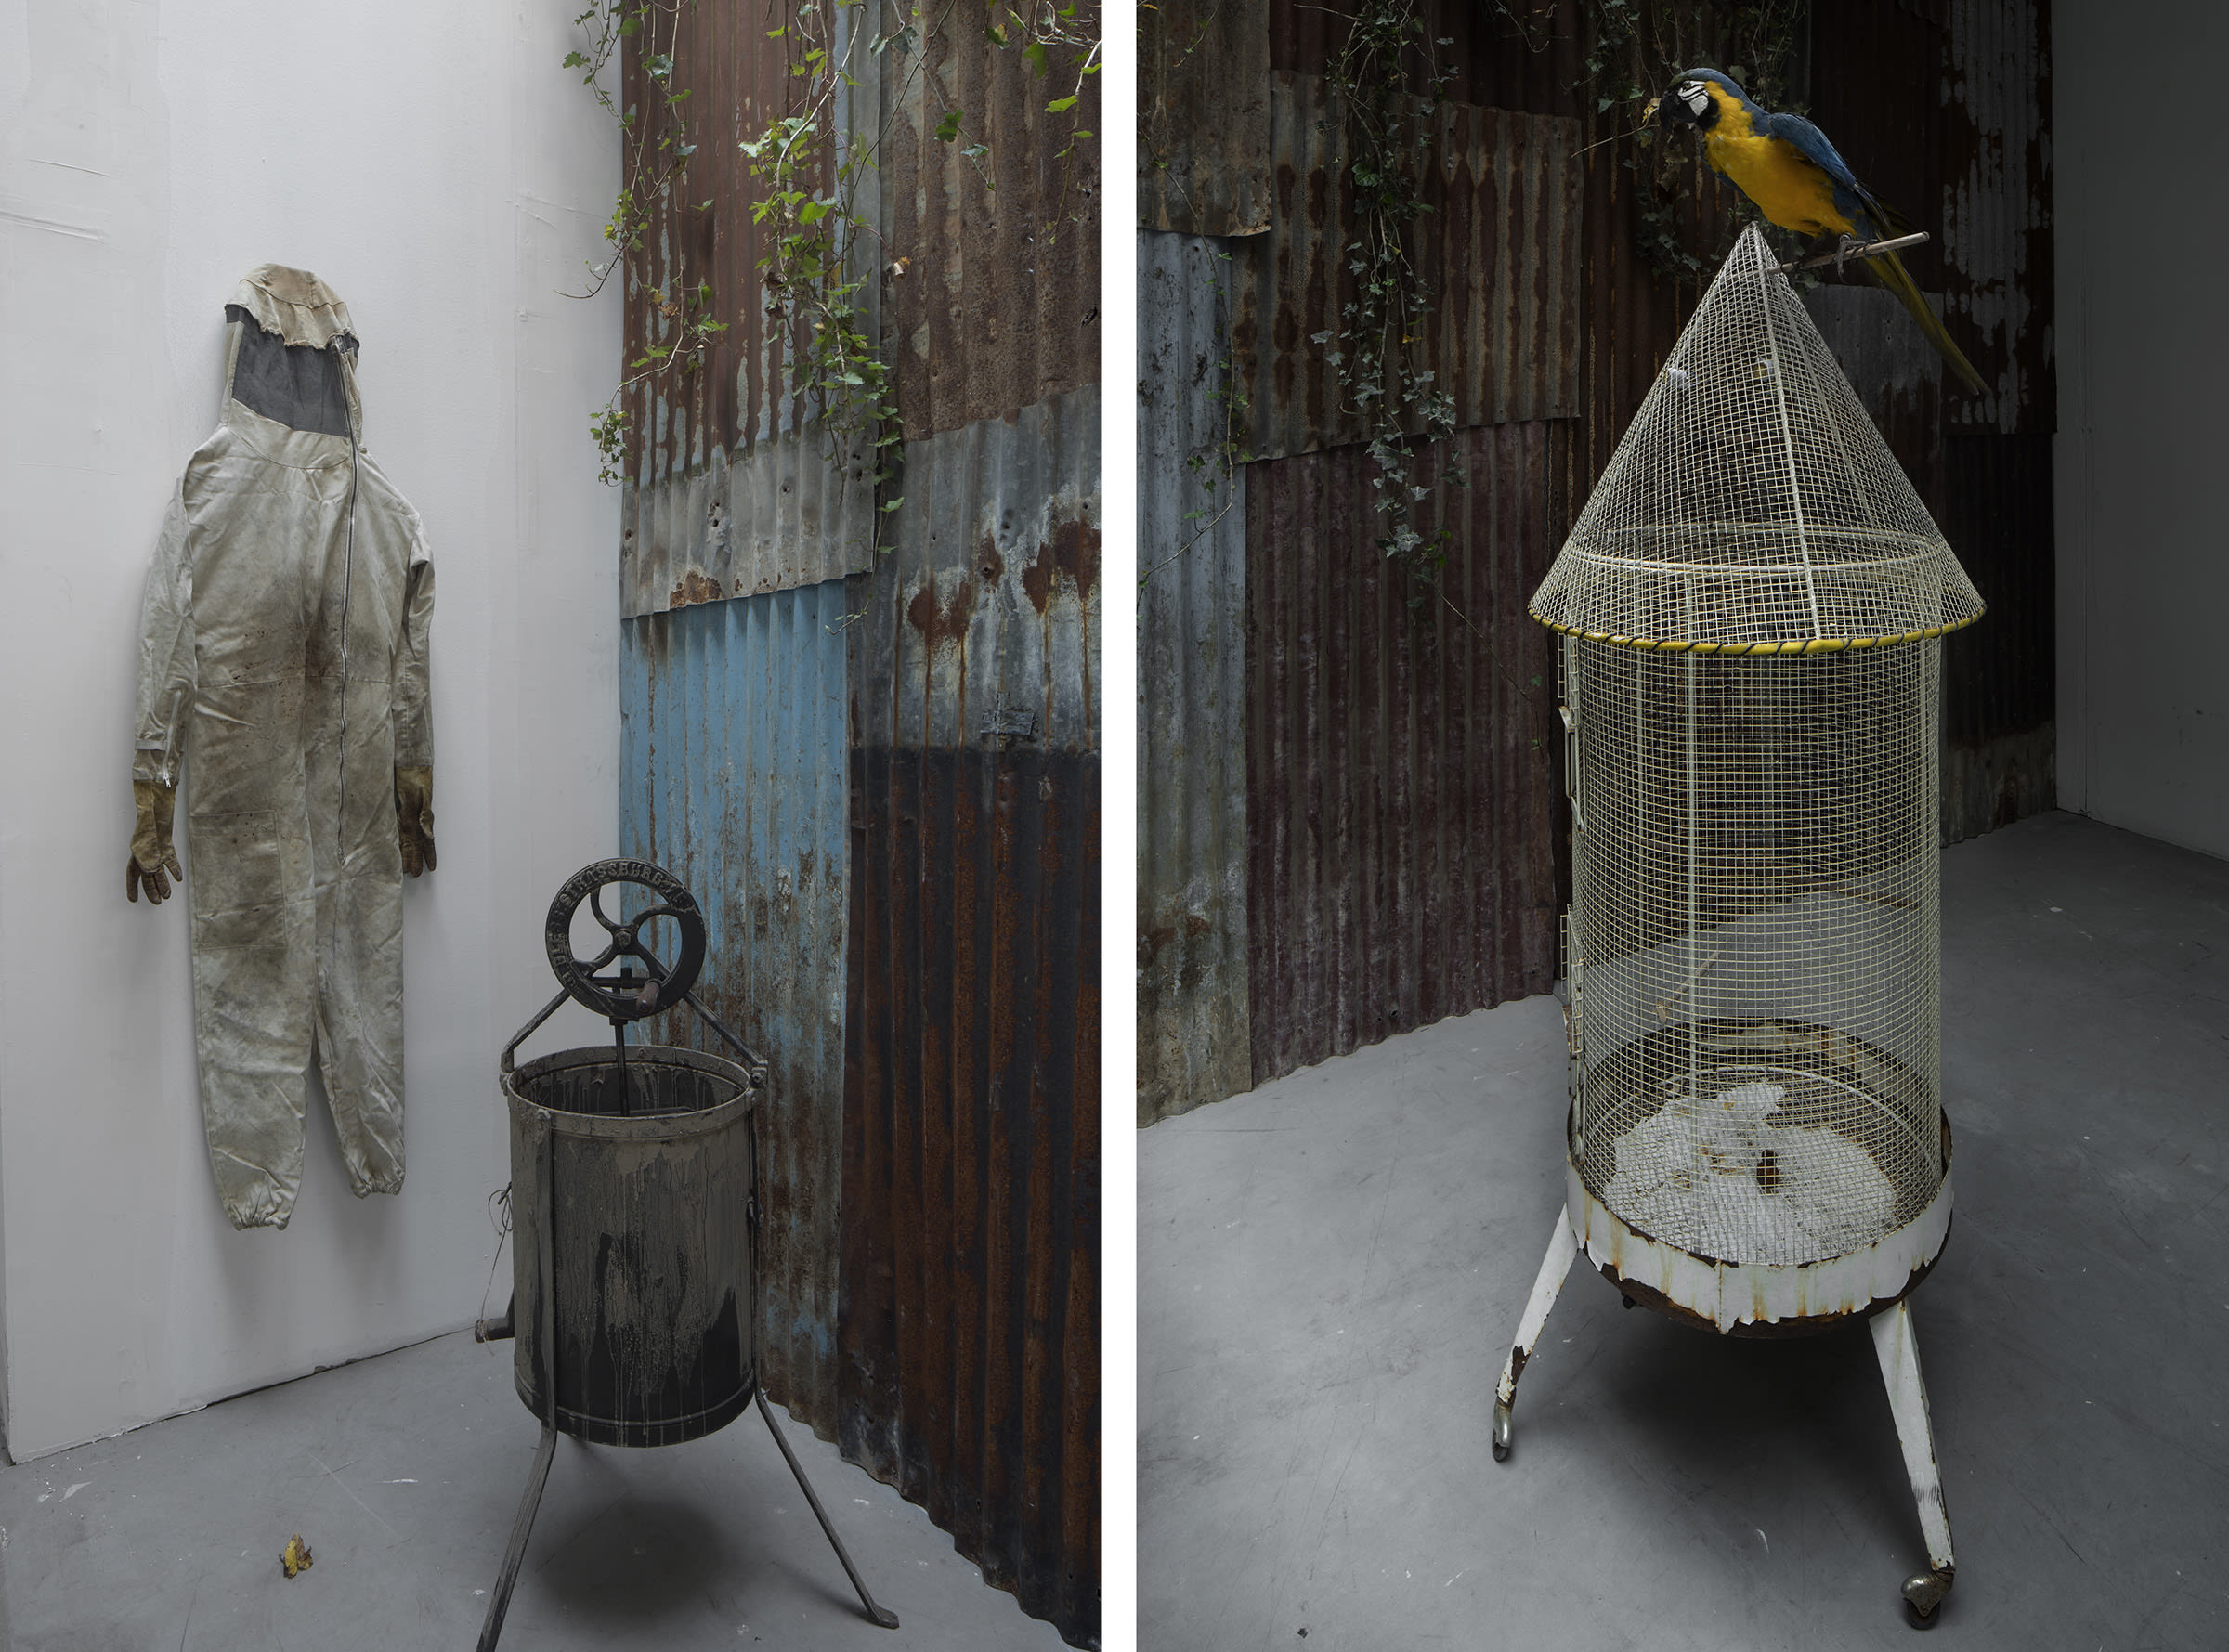 Hiroshi Sugimoto, The Bee Keeper (left) and The Euthanasia Association Chairman (right), 2014. Installation views at Sugimoto’s exhibition 'Aujourd’hui le monde est mort [Lost Human Genetic Archive]' at Palais de Tokyo in 2014. © Hiroshi Sugimoto.